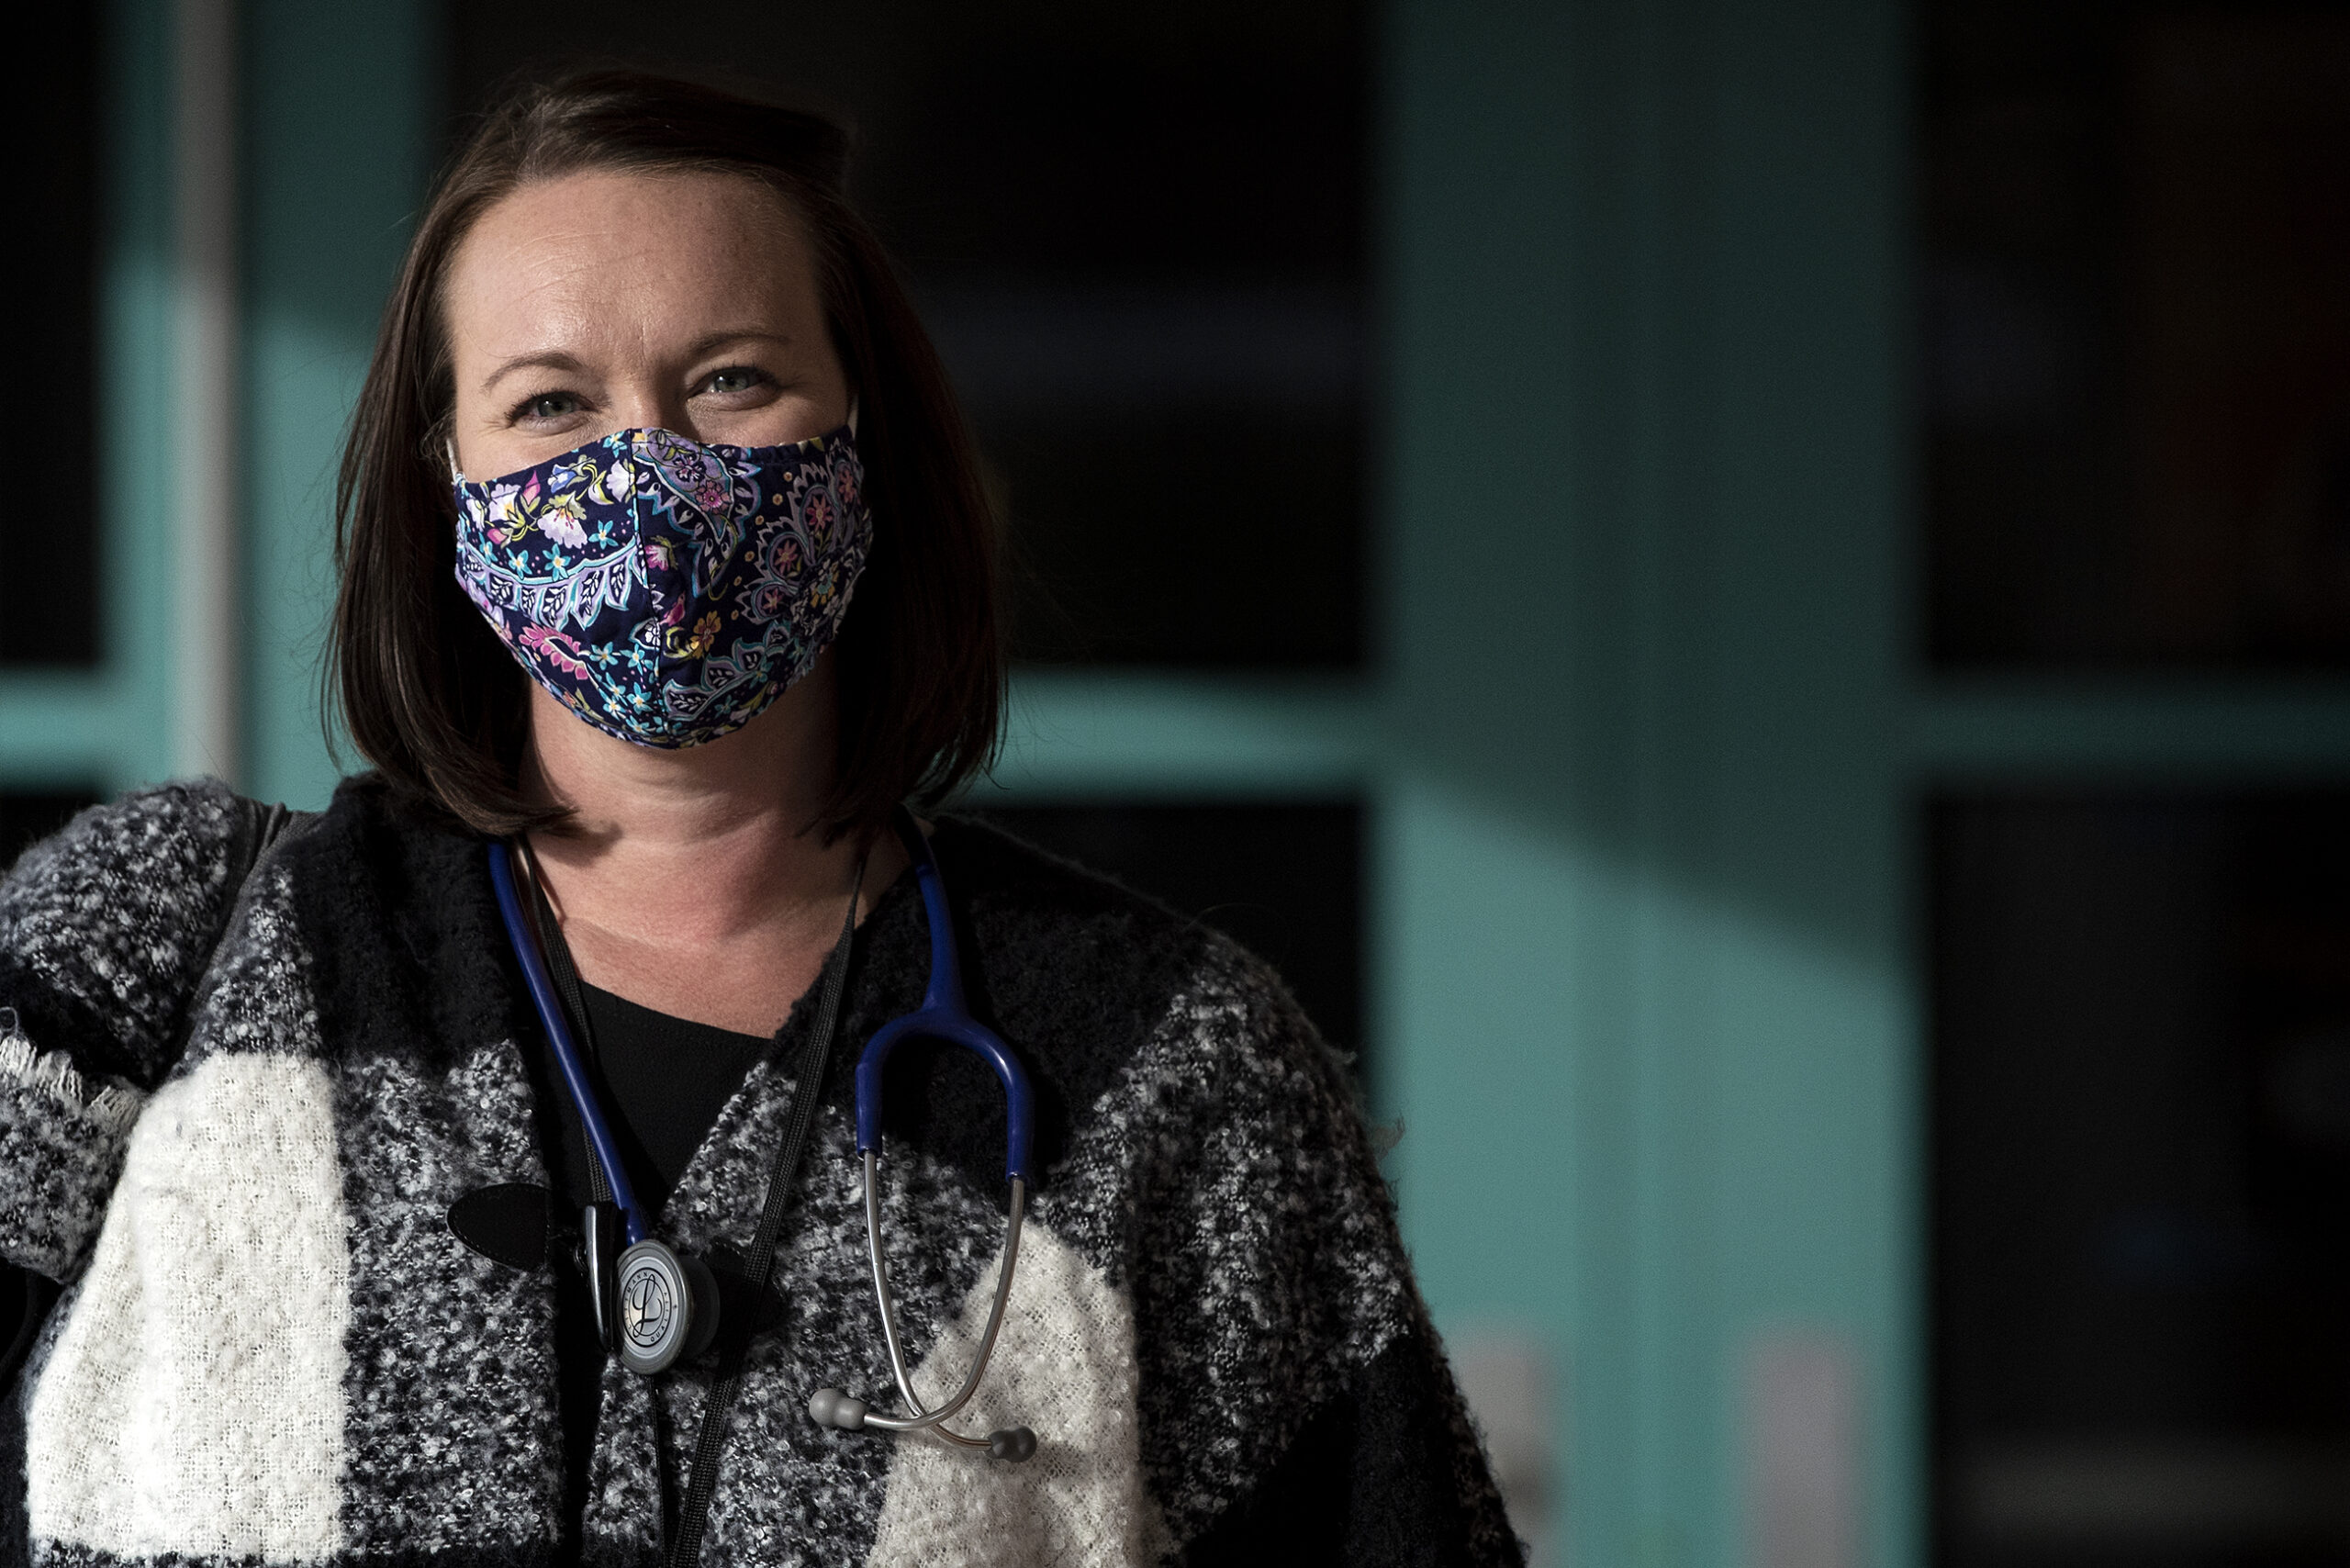 A woman in a face mask wears a stethoscope around her neck